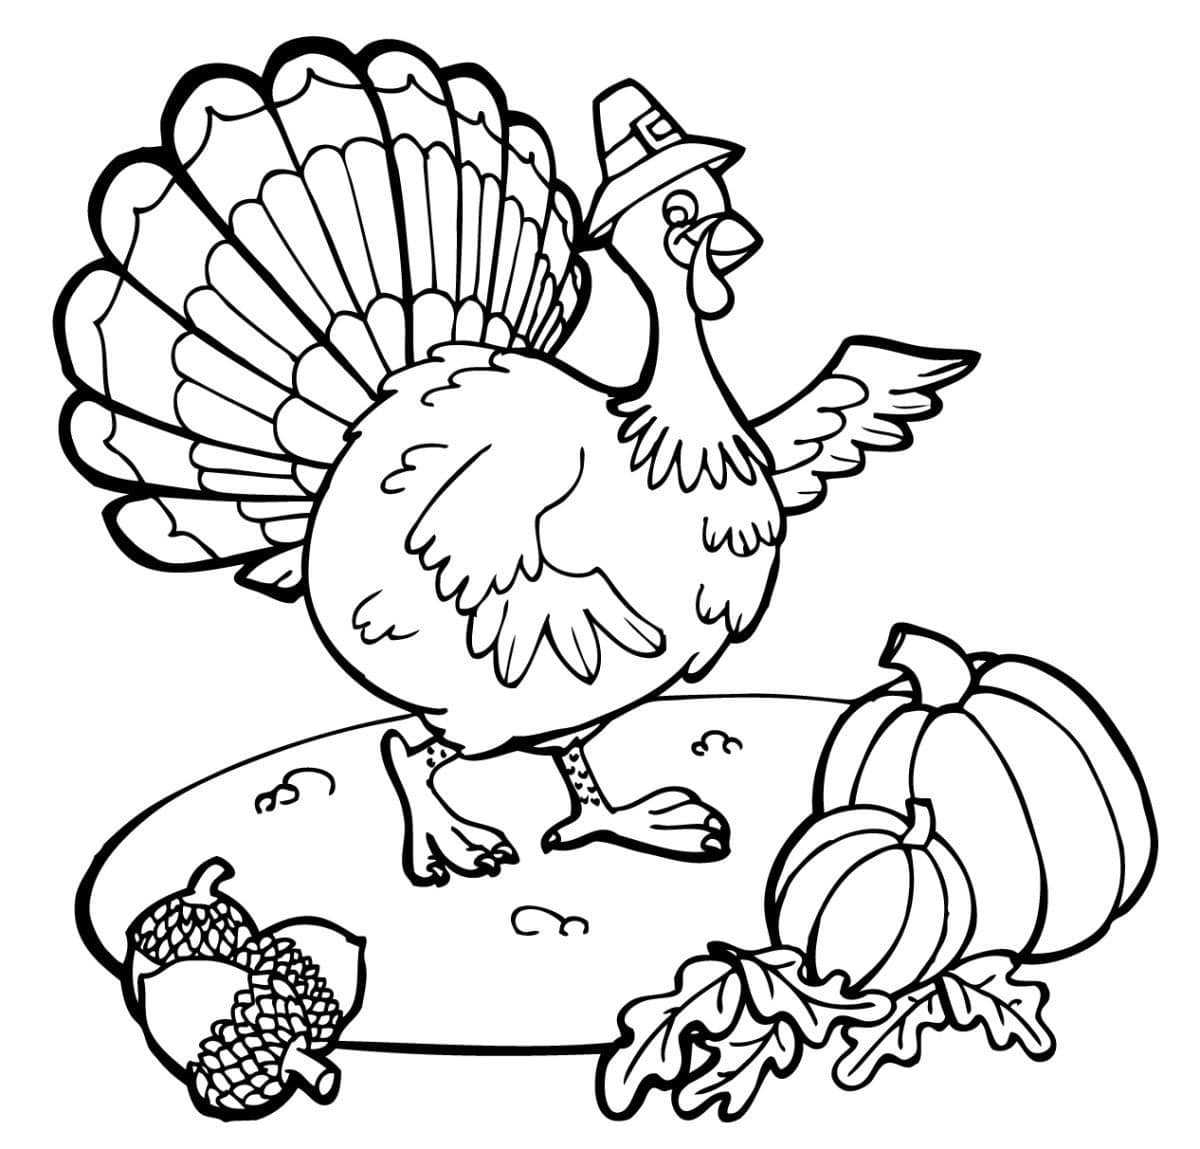 30 FREE Thanksgiving Coloring Pages For Adults Kids